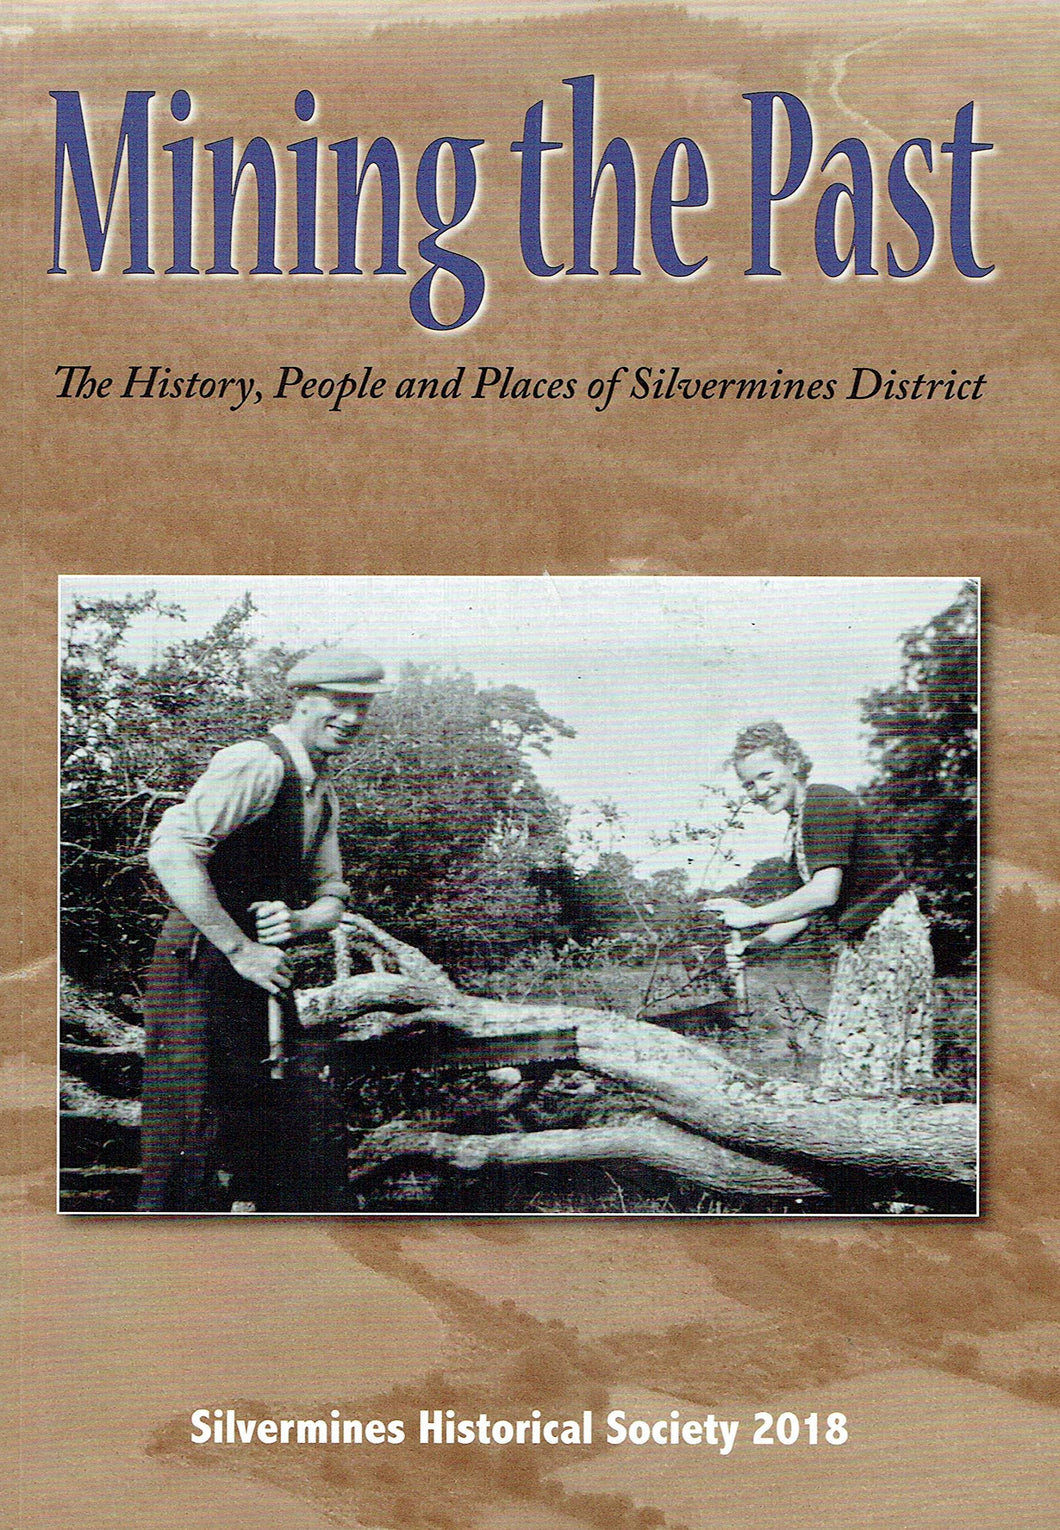 Mining the Past: The History, People and Places of Silvermines District